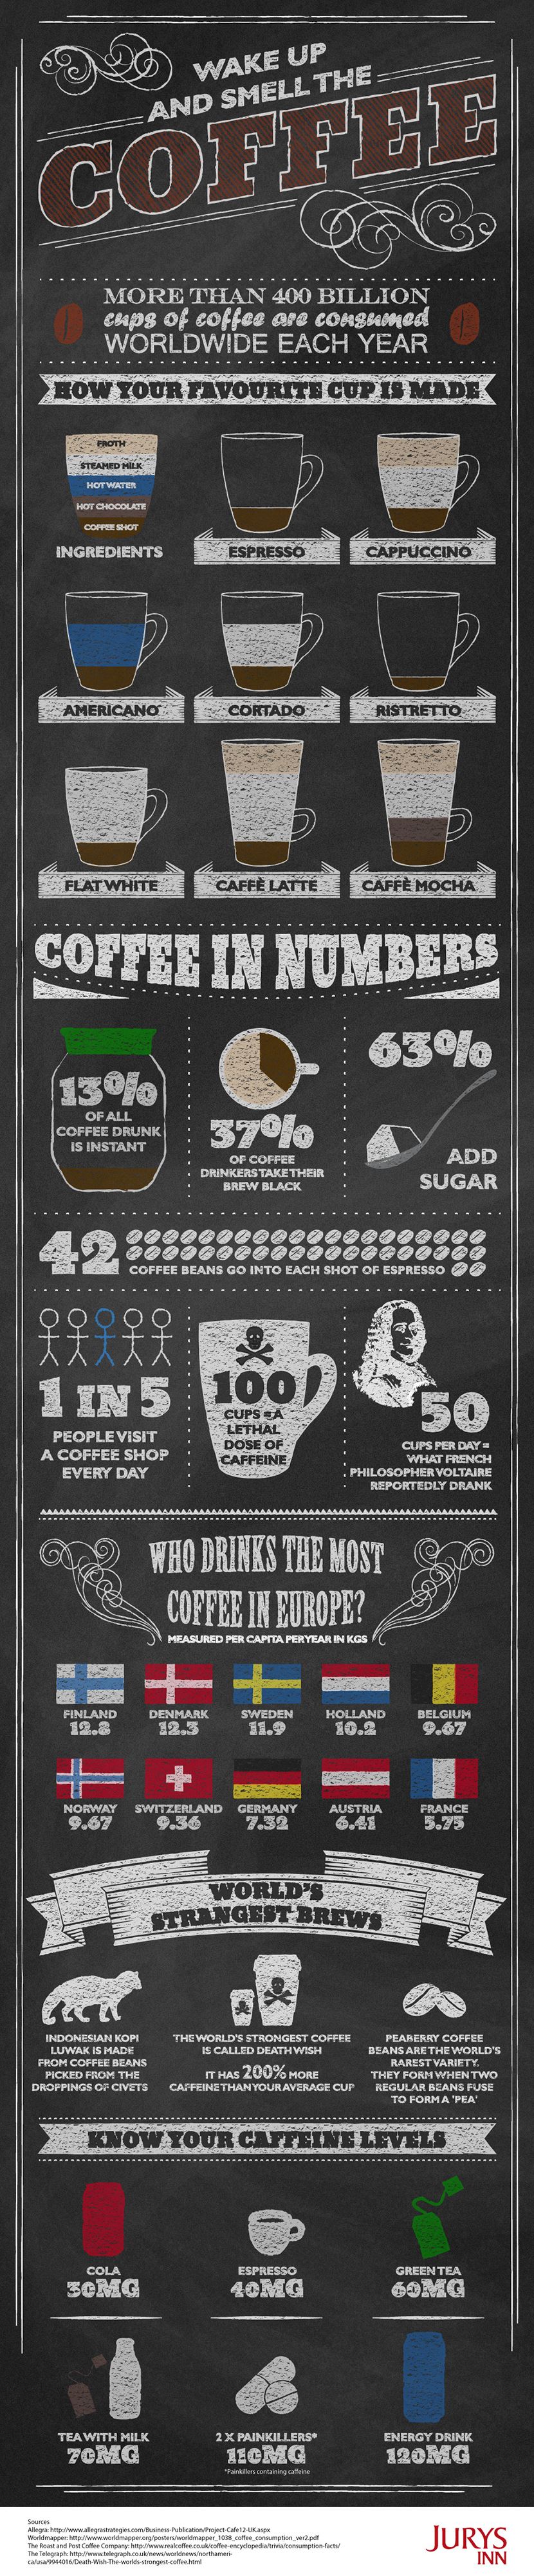 Infographic - Wake up and Smell the Coffee